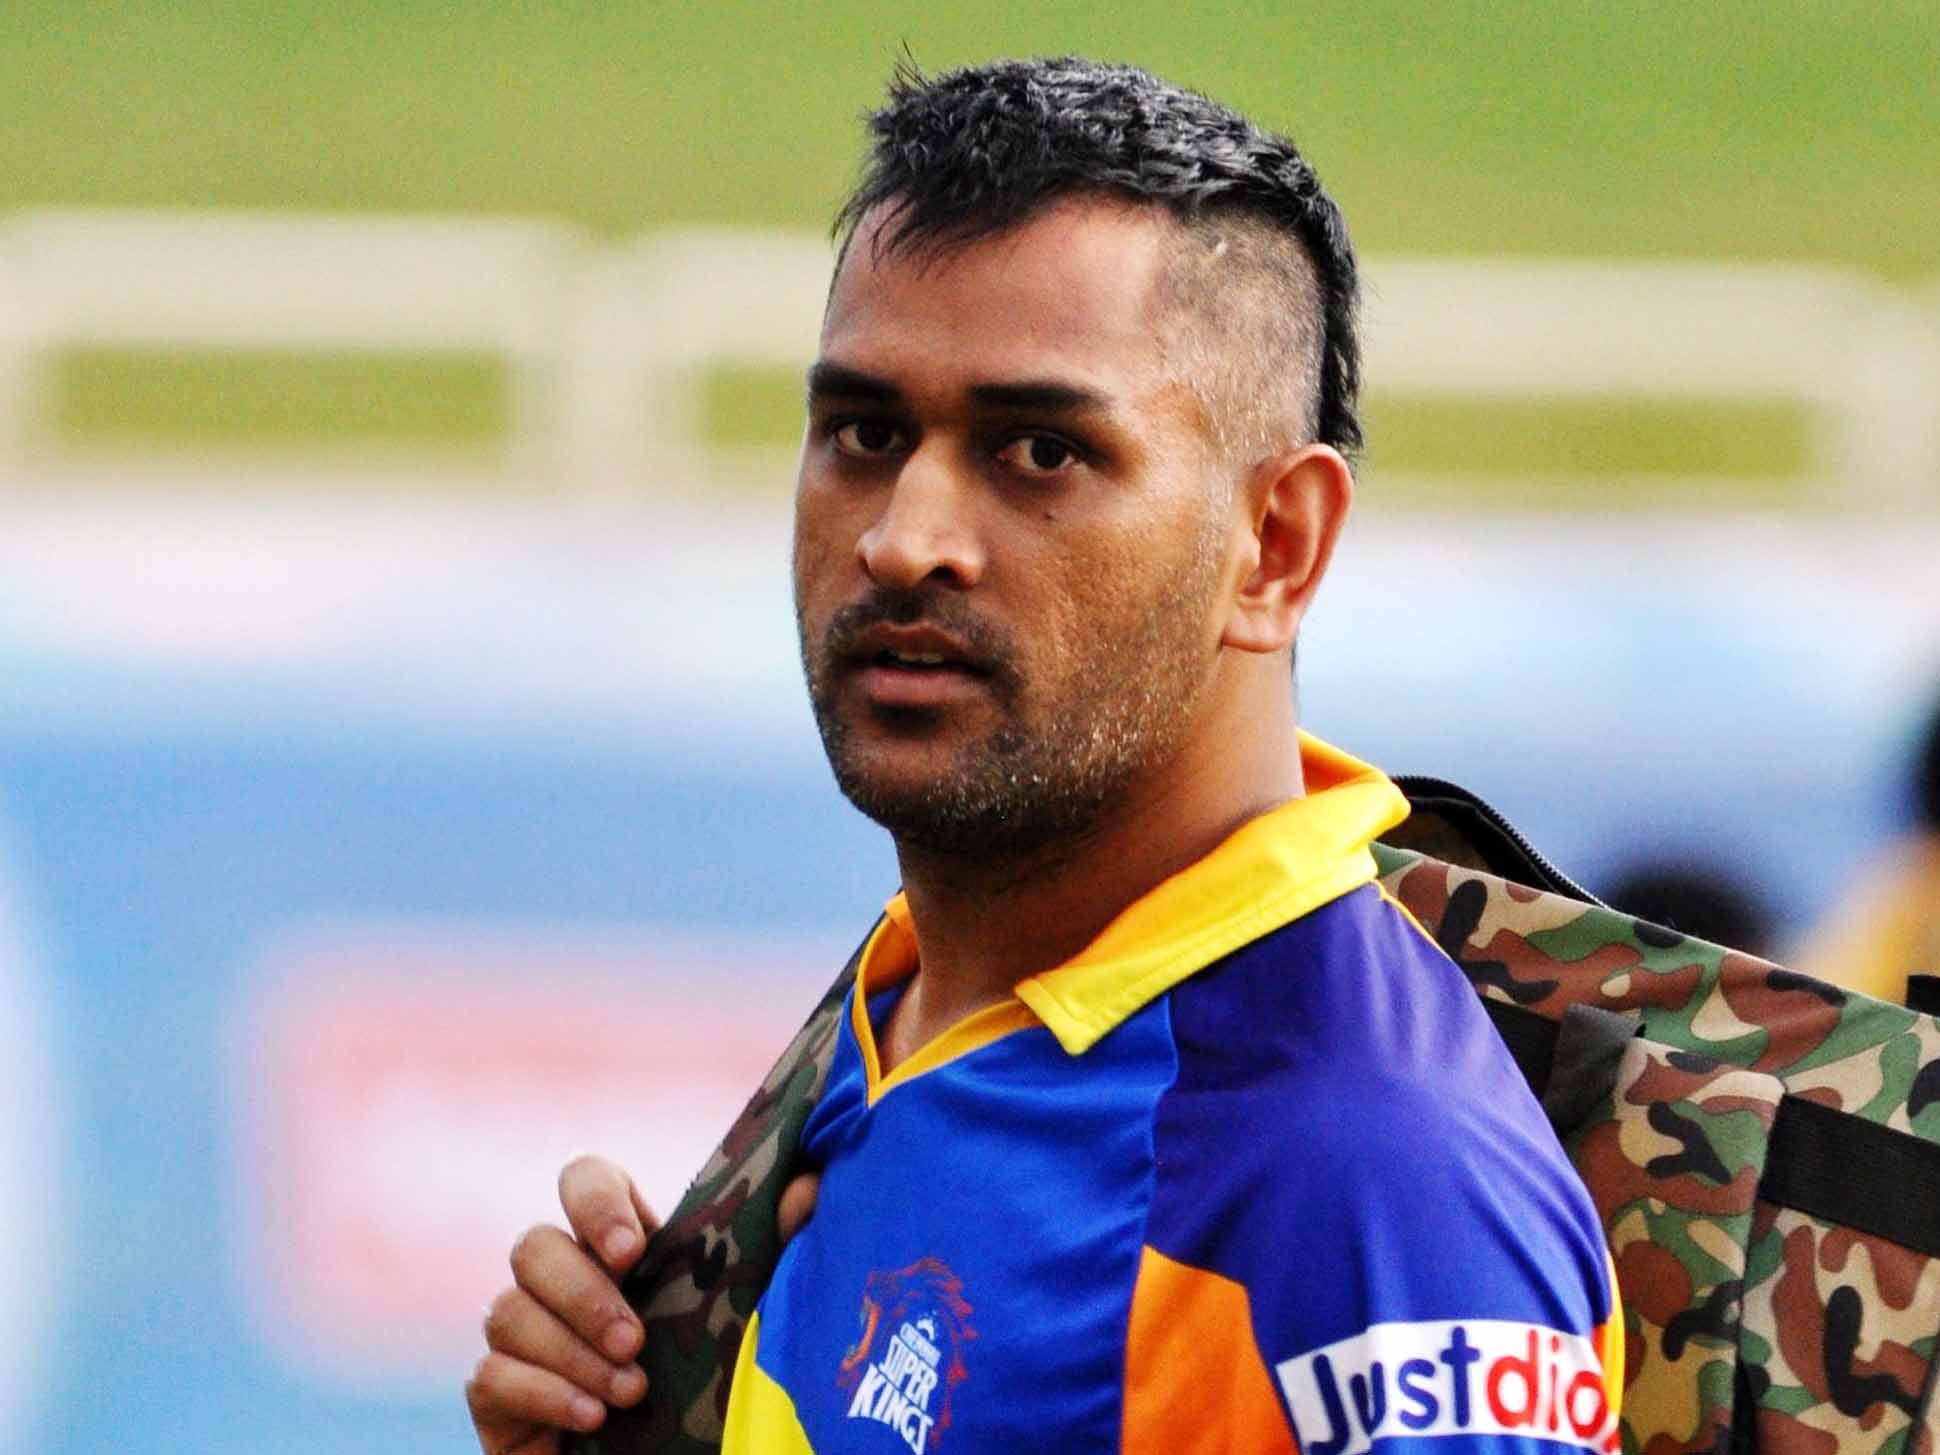 Mahendra Singh Dhoni cute hd wallpapers Wallpapers Wide Free